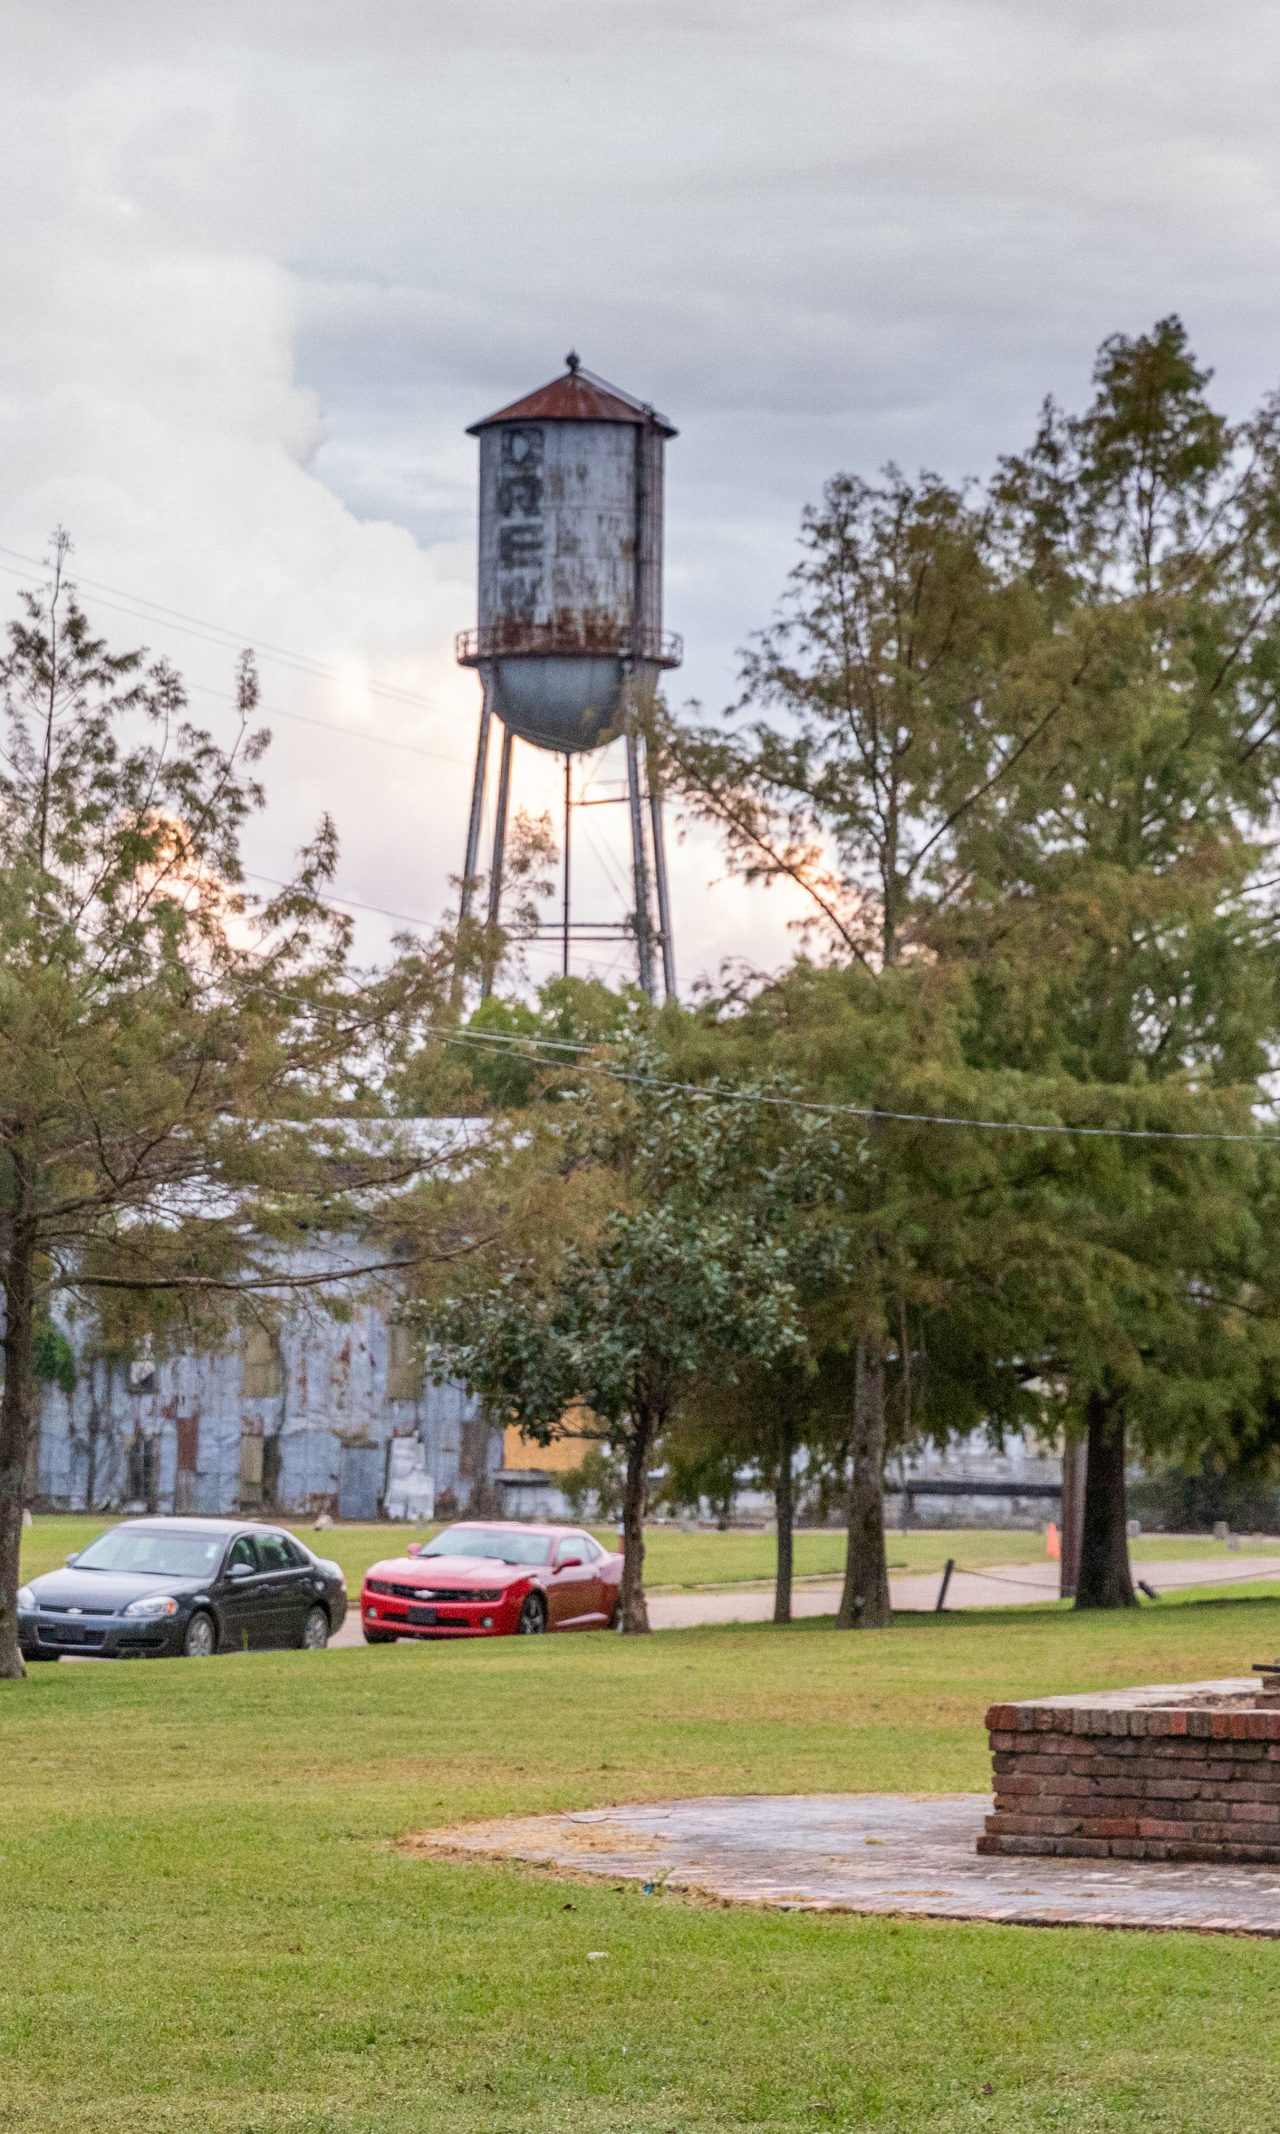 A view of downtown Drew, Mississippi, a community where grassroots efforts are underway to build resident leadership and ownership, civic engagement and create paths for community members to be involved.